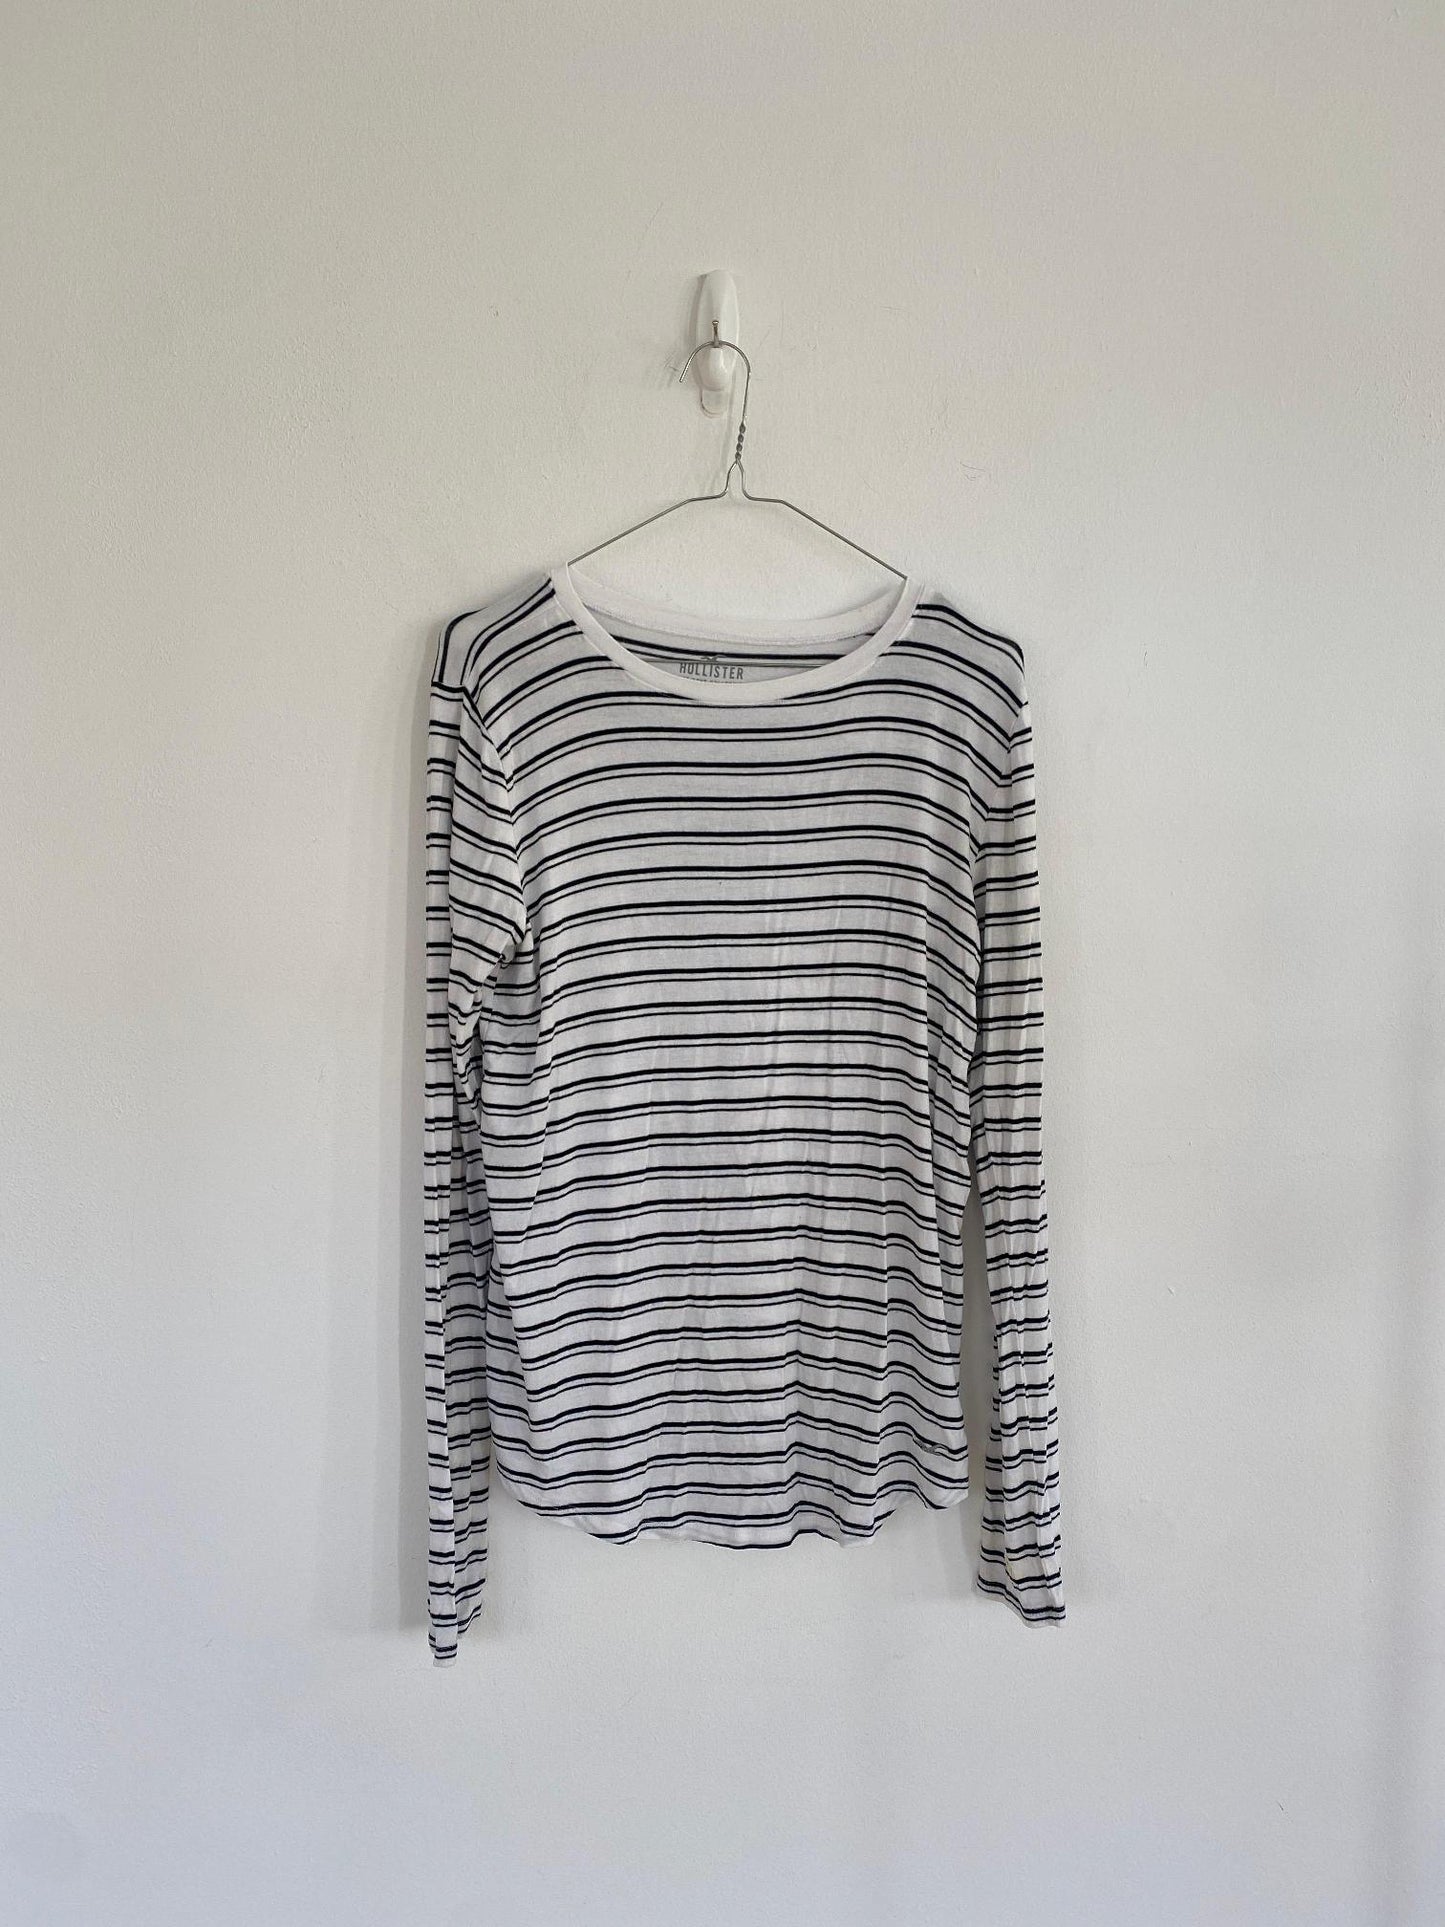 Black and white striped top, Hollister, Size S - Damaged Item Sale